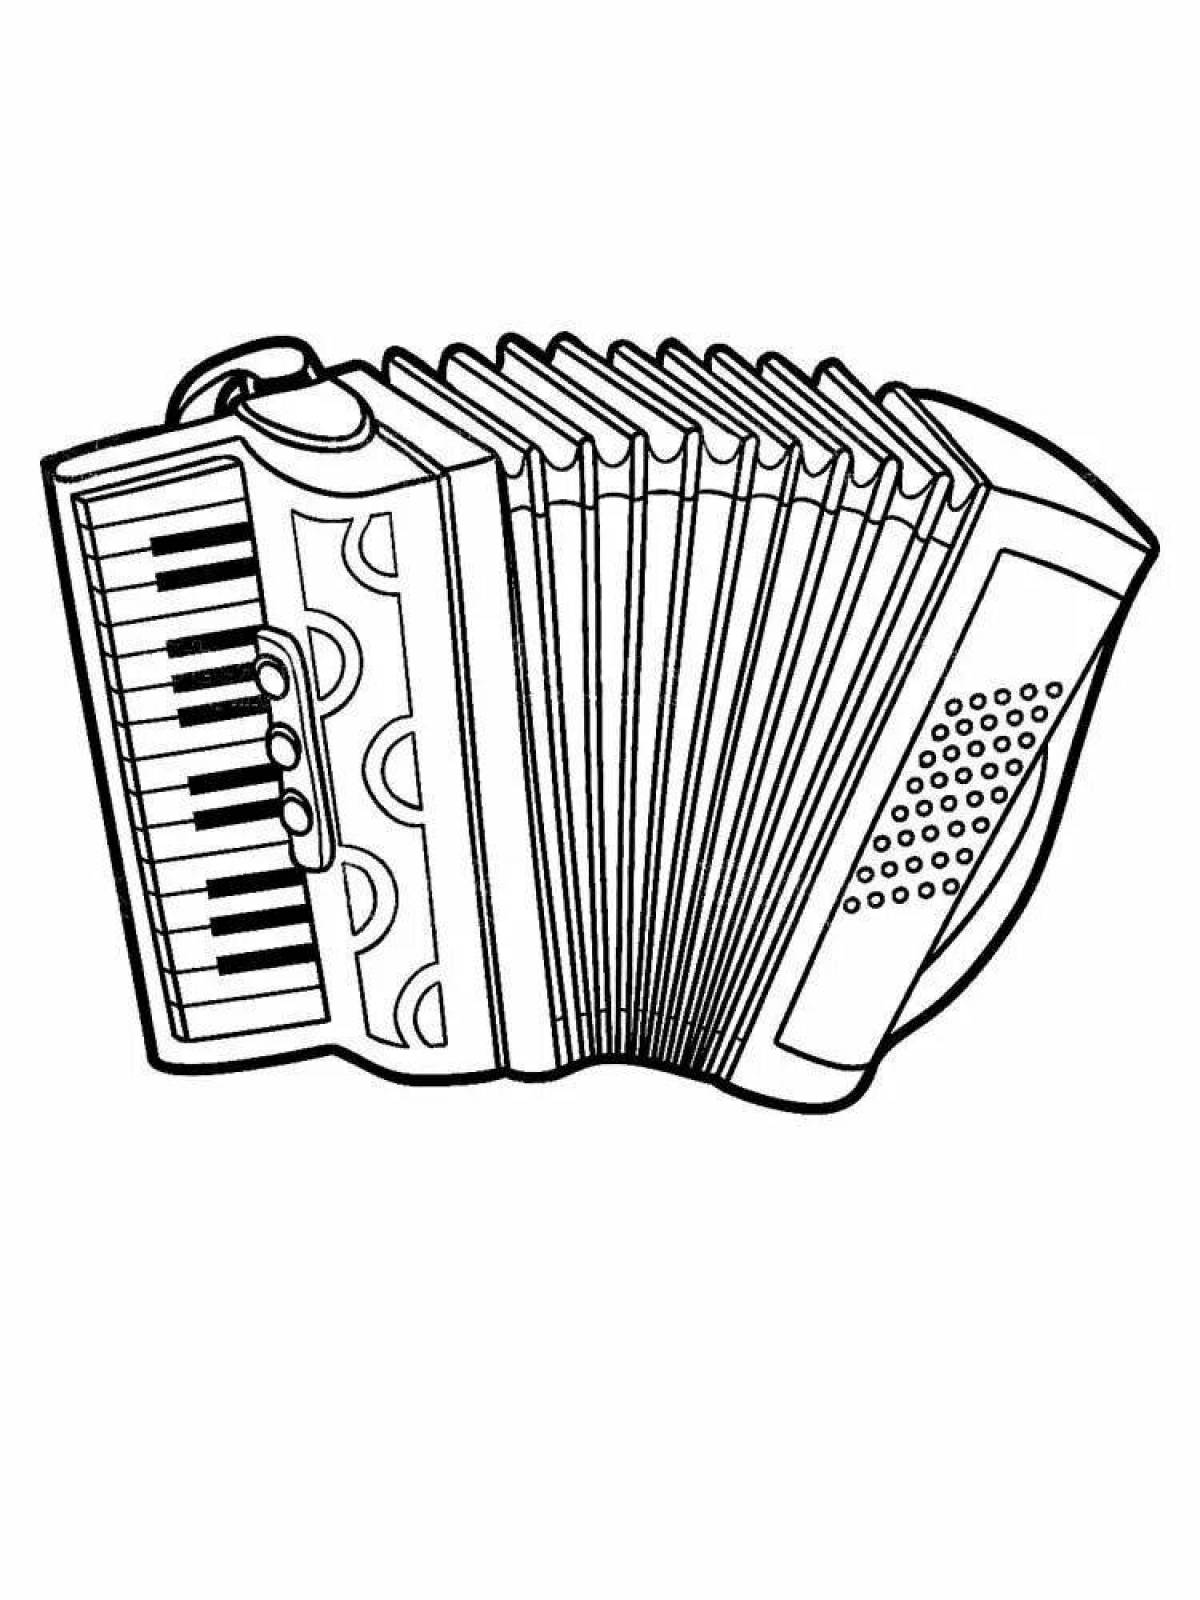 Awesome accordion coloring page